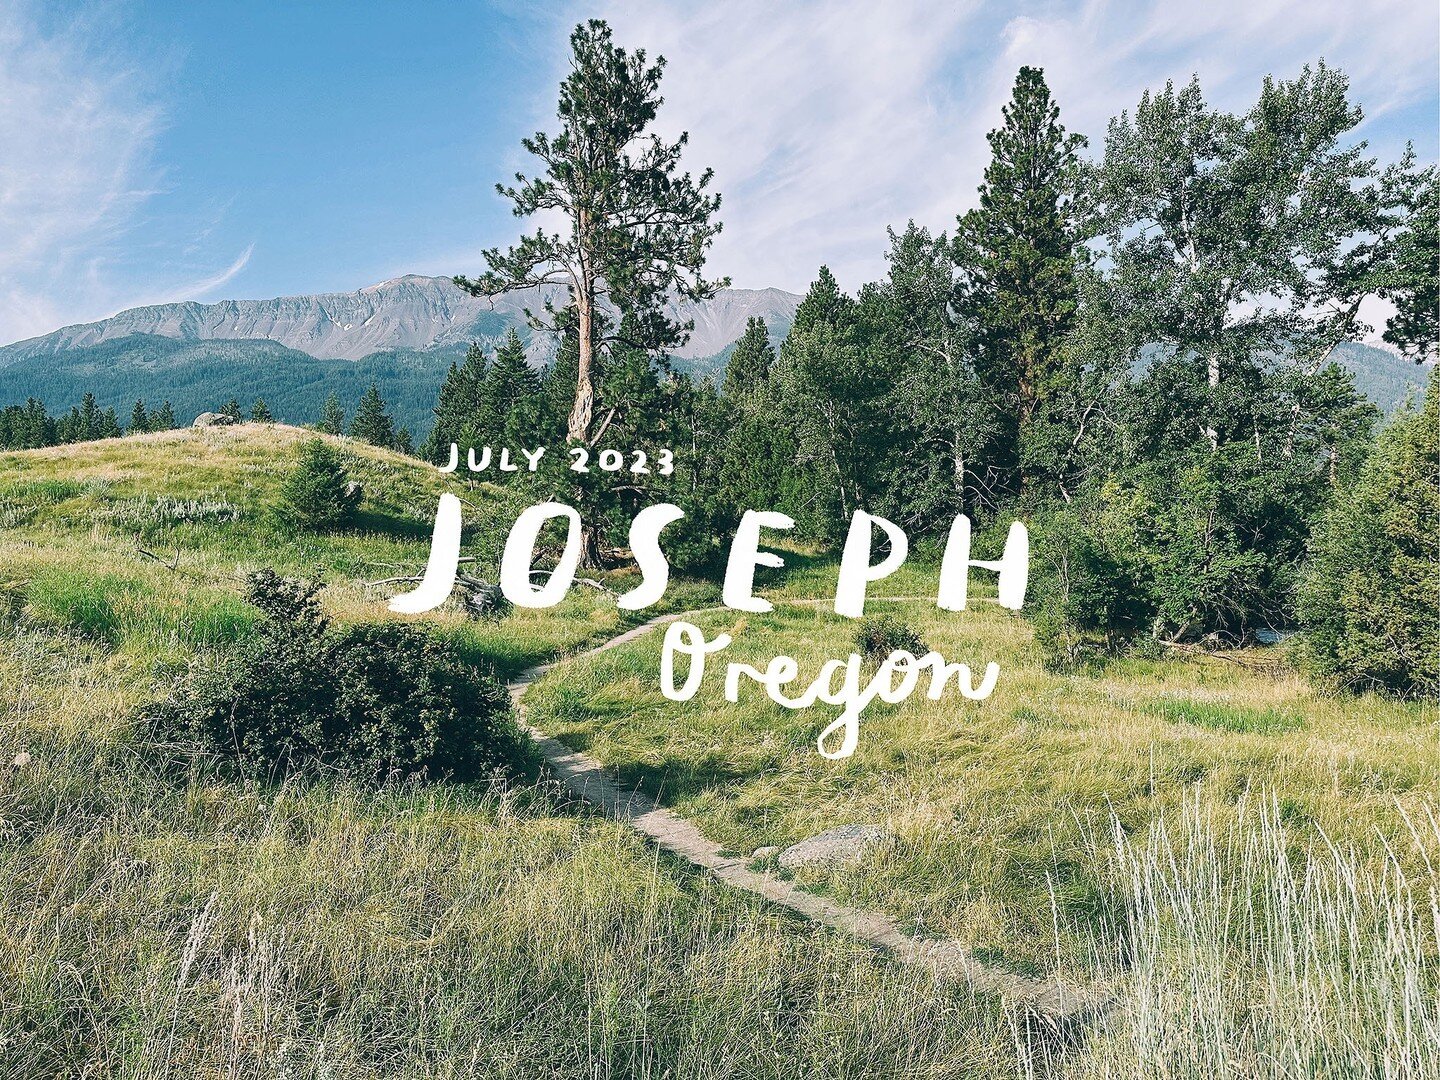 A little getaway to Joseph, Oregon a few weekends ago. Horses in the backyard and an old record collection for entertainment. Got there via the scenic byway, which runs Baker City to Joseph via Hells Canyon&mdash;hardly a soul on the road.